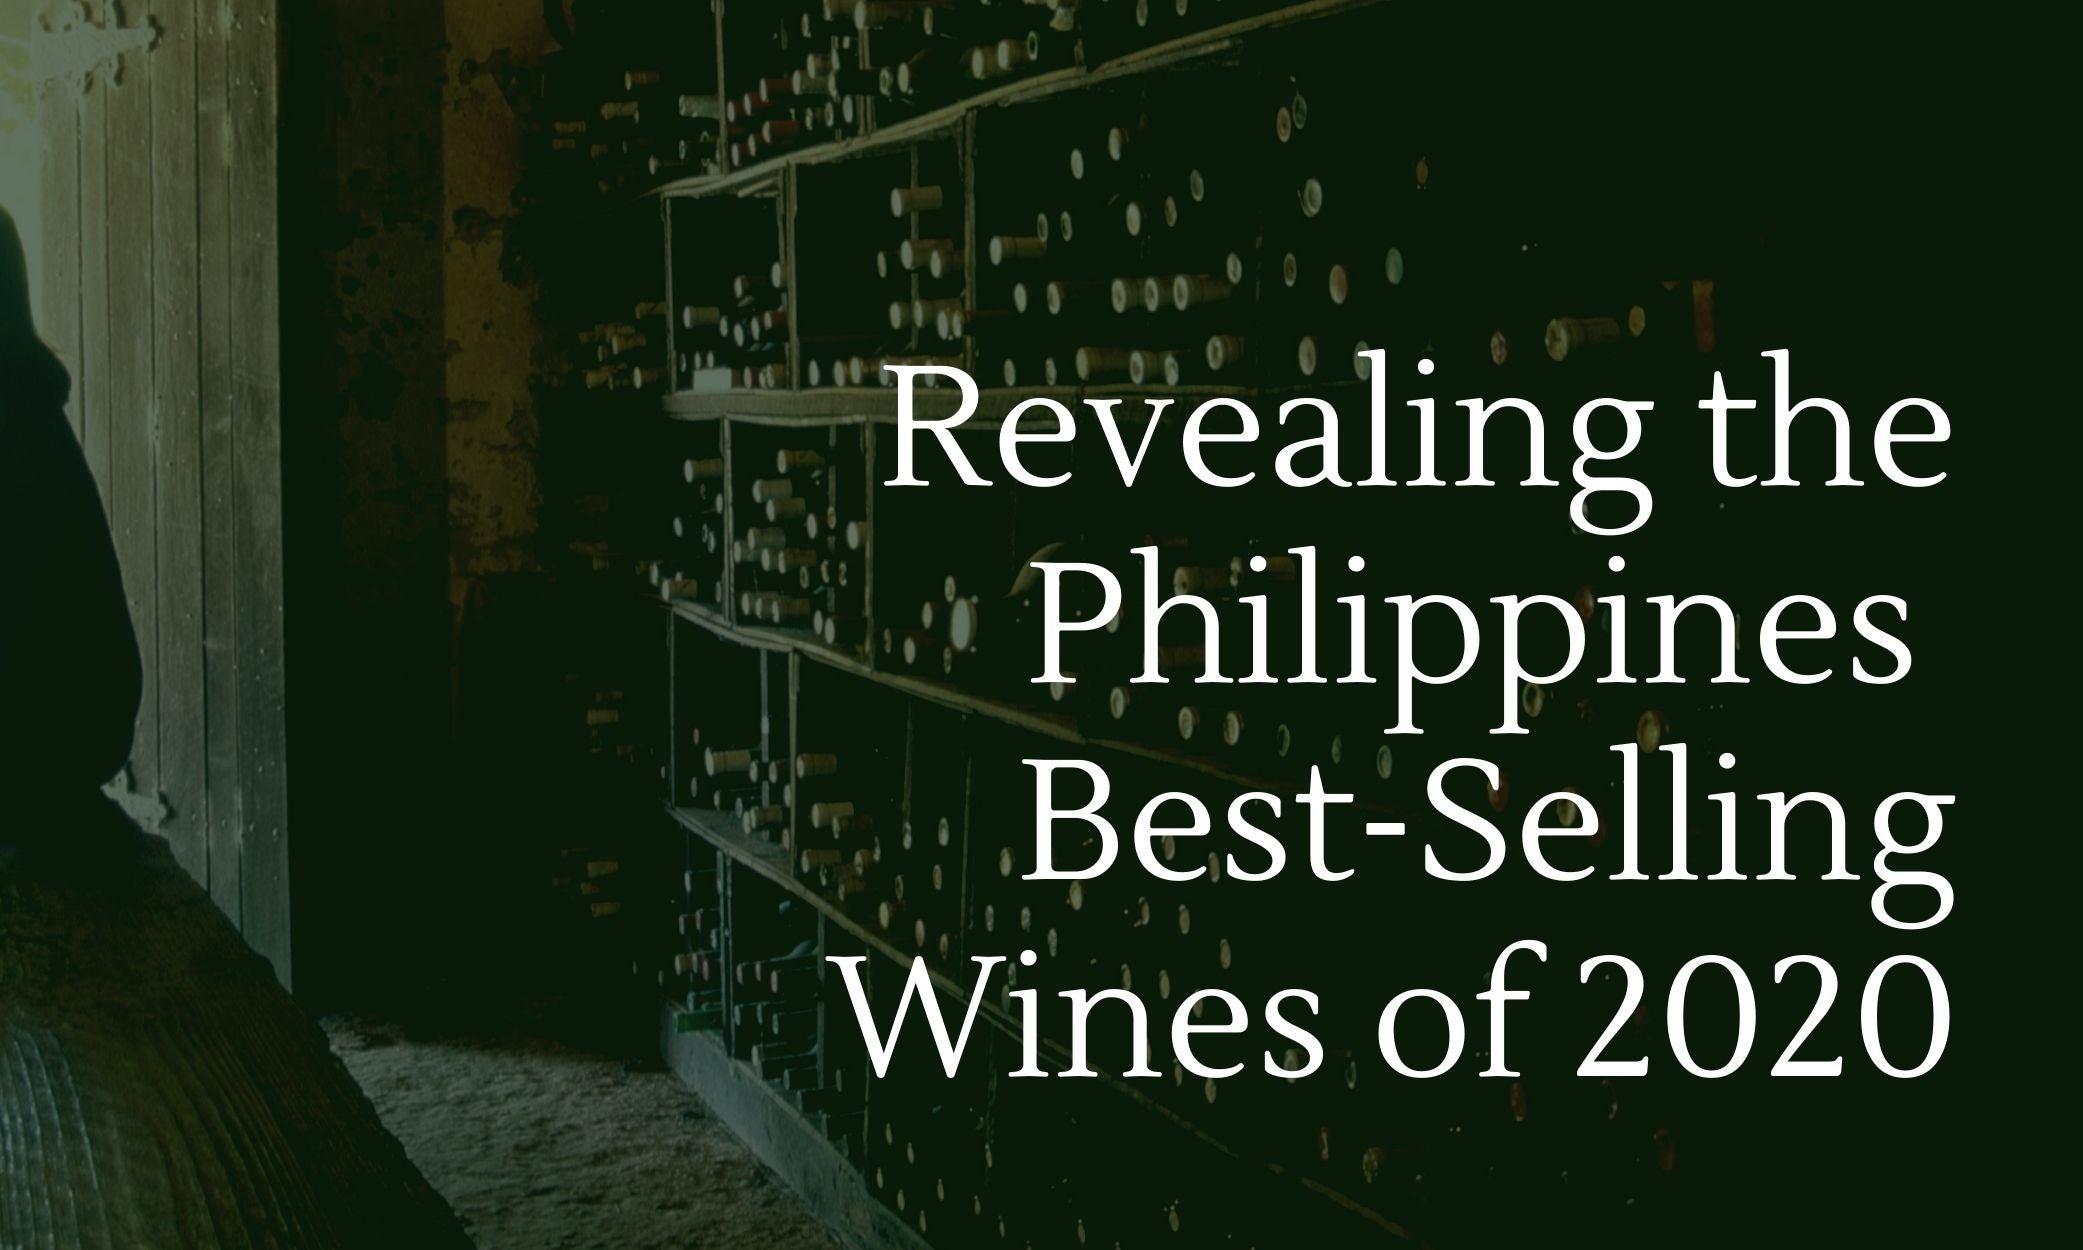 Winery.ph to Reveal the Philippines' Best-Selling Wines of 2020